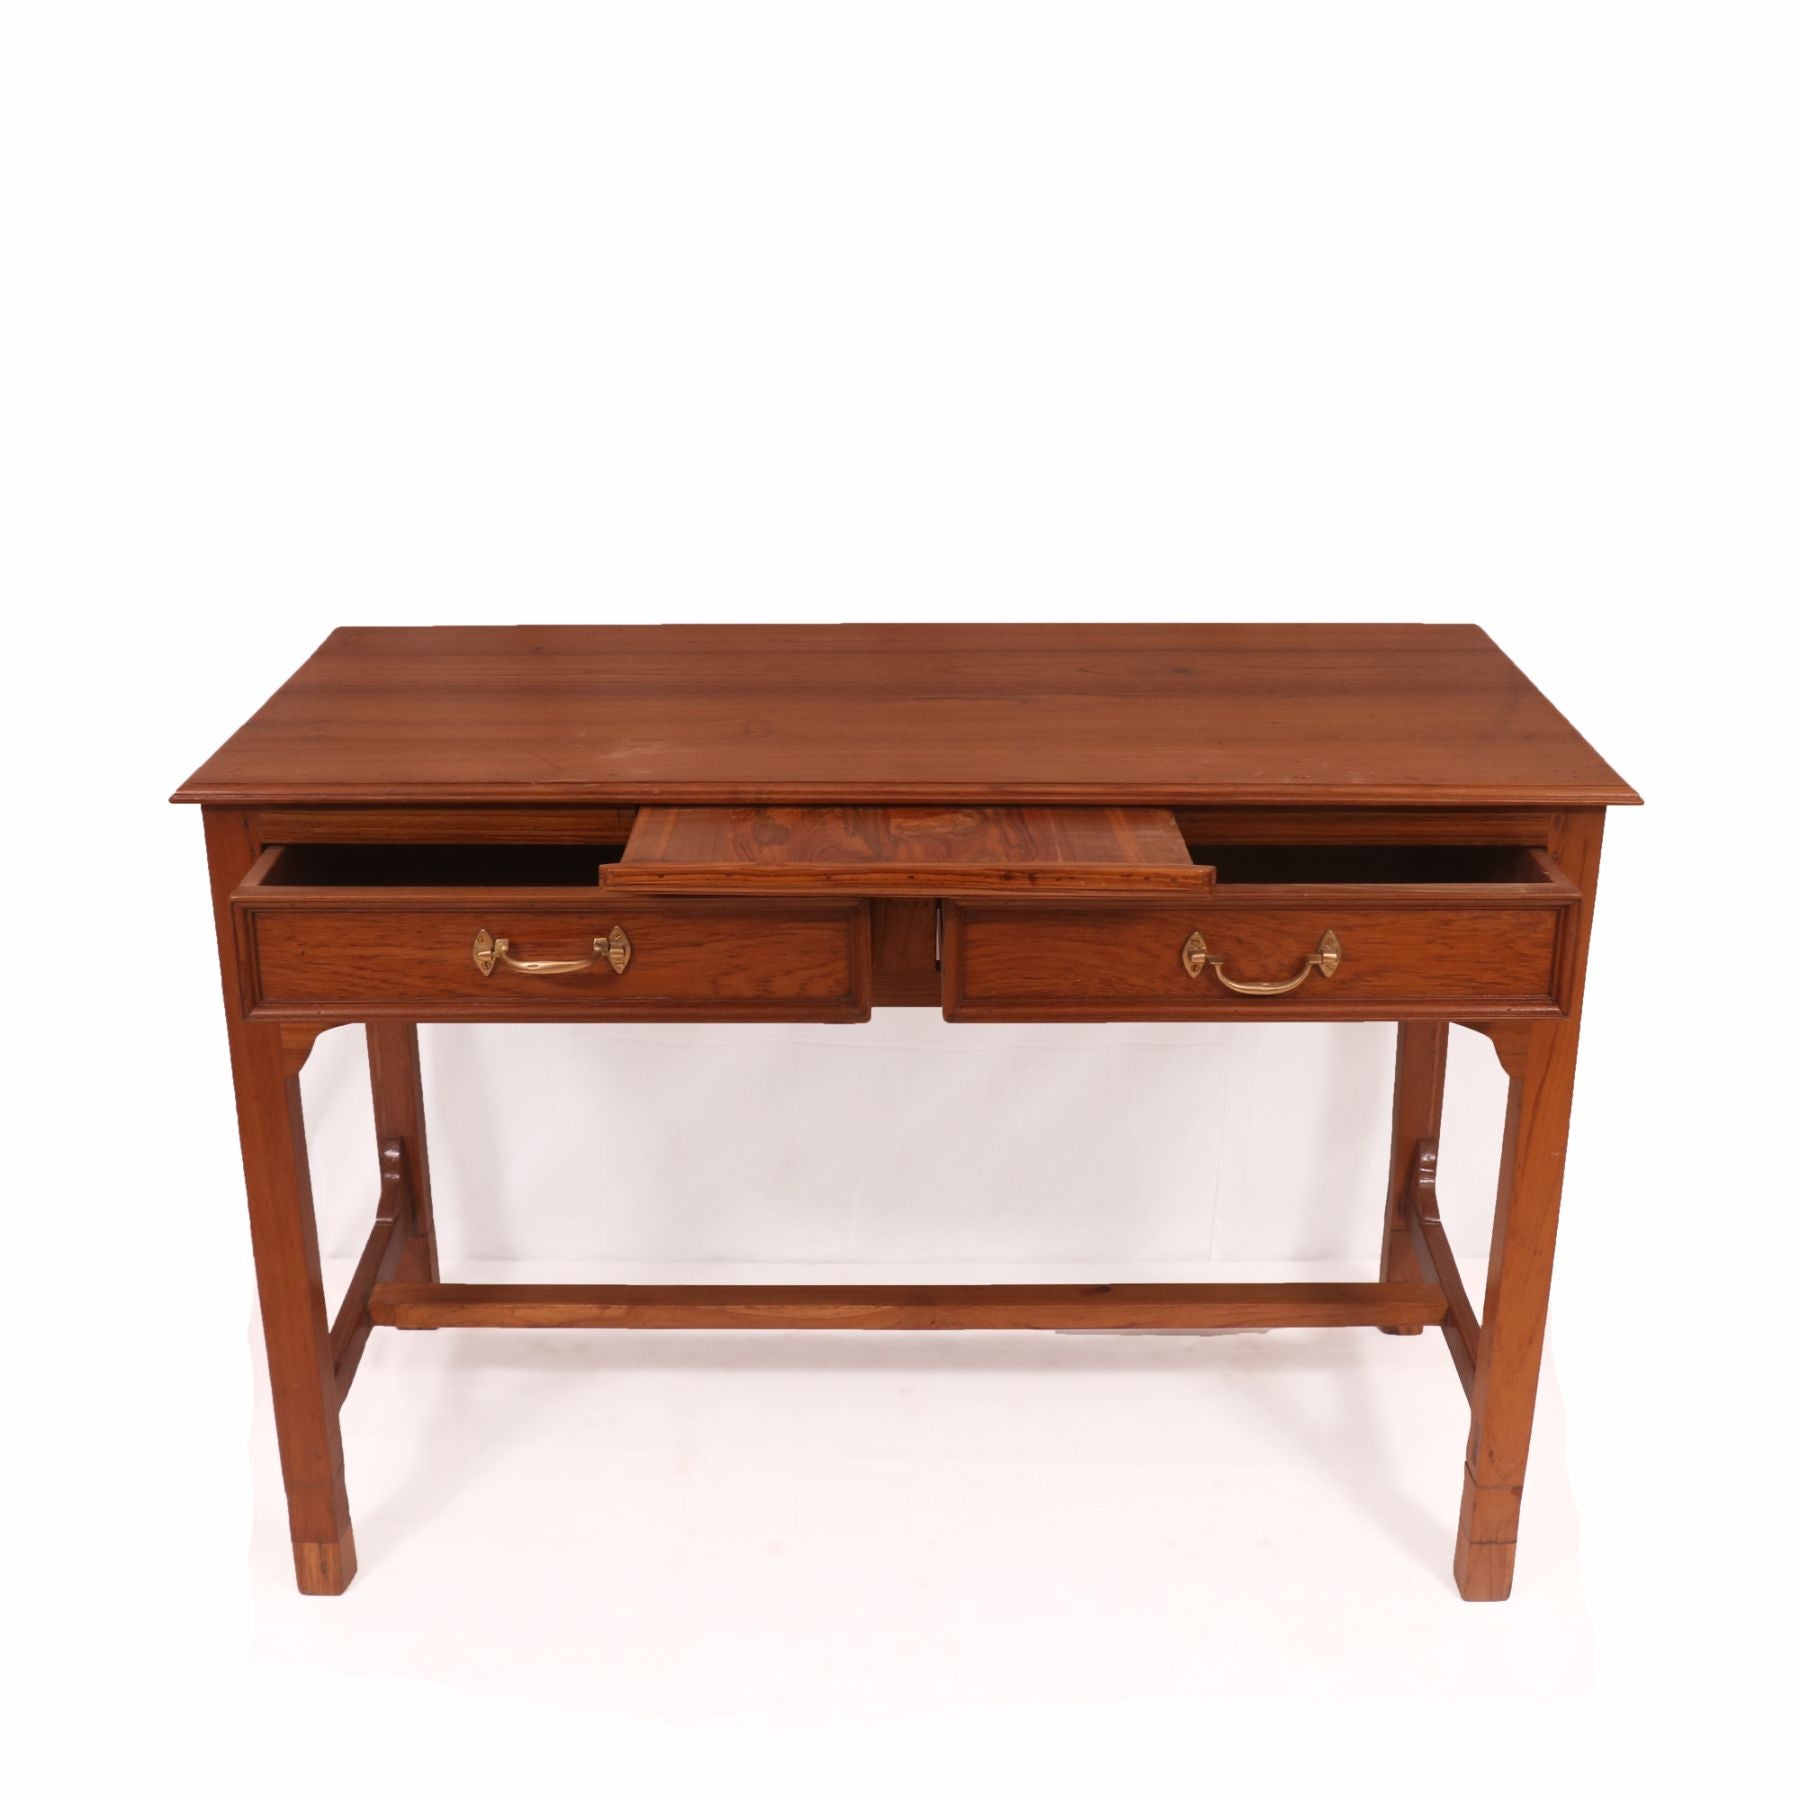 Essential Compact Study Table Study Table